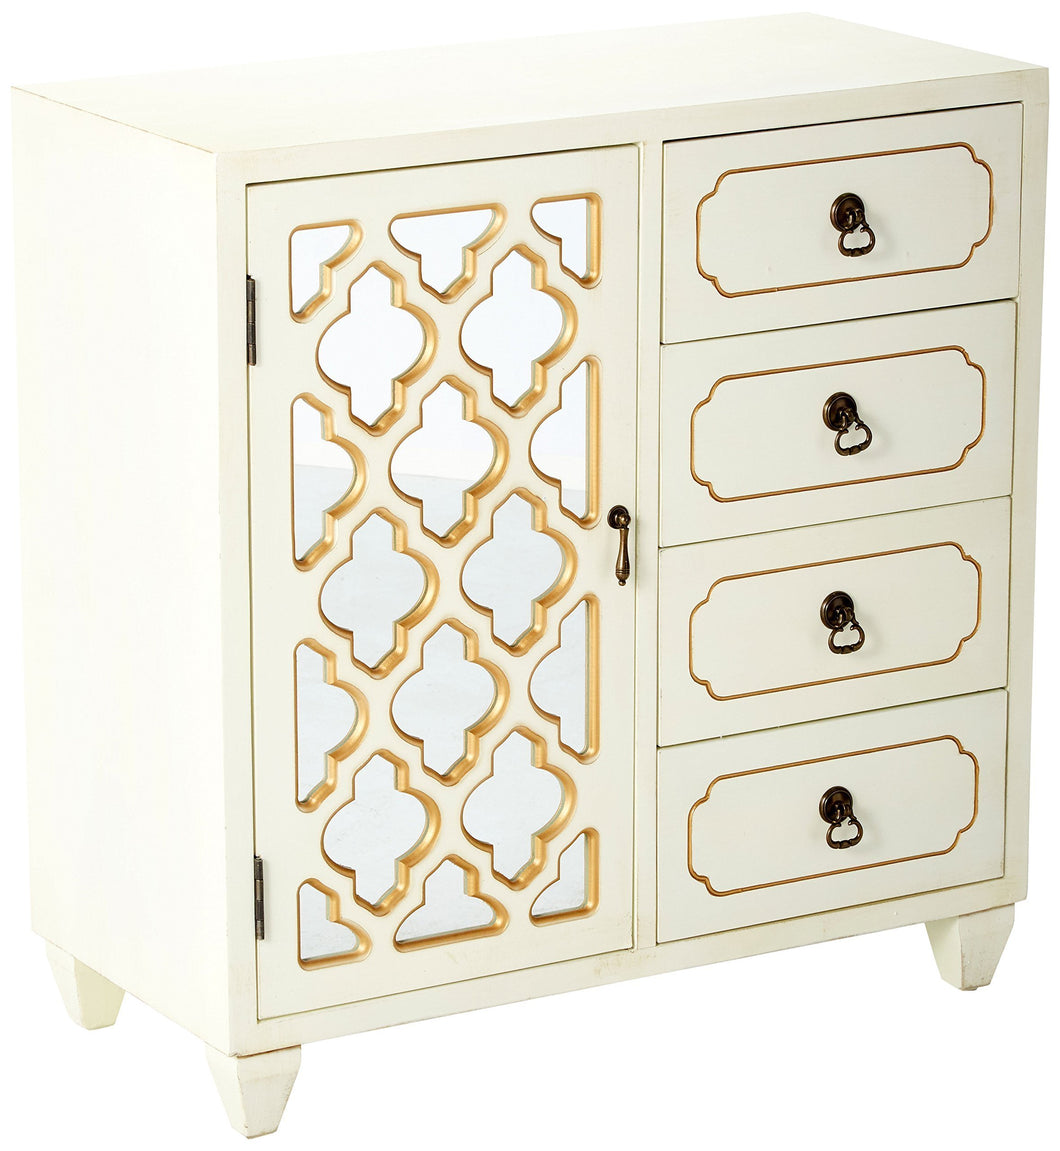 Purchase heather ann creations 4 drawer wooden accent chest and cabinet multi clover pattern grille with mirrored backing 30 75h x 29 5w beige gold